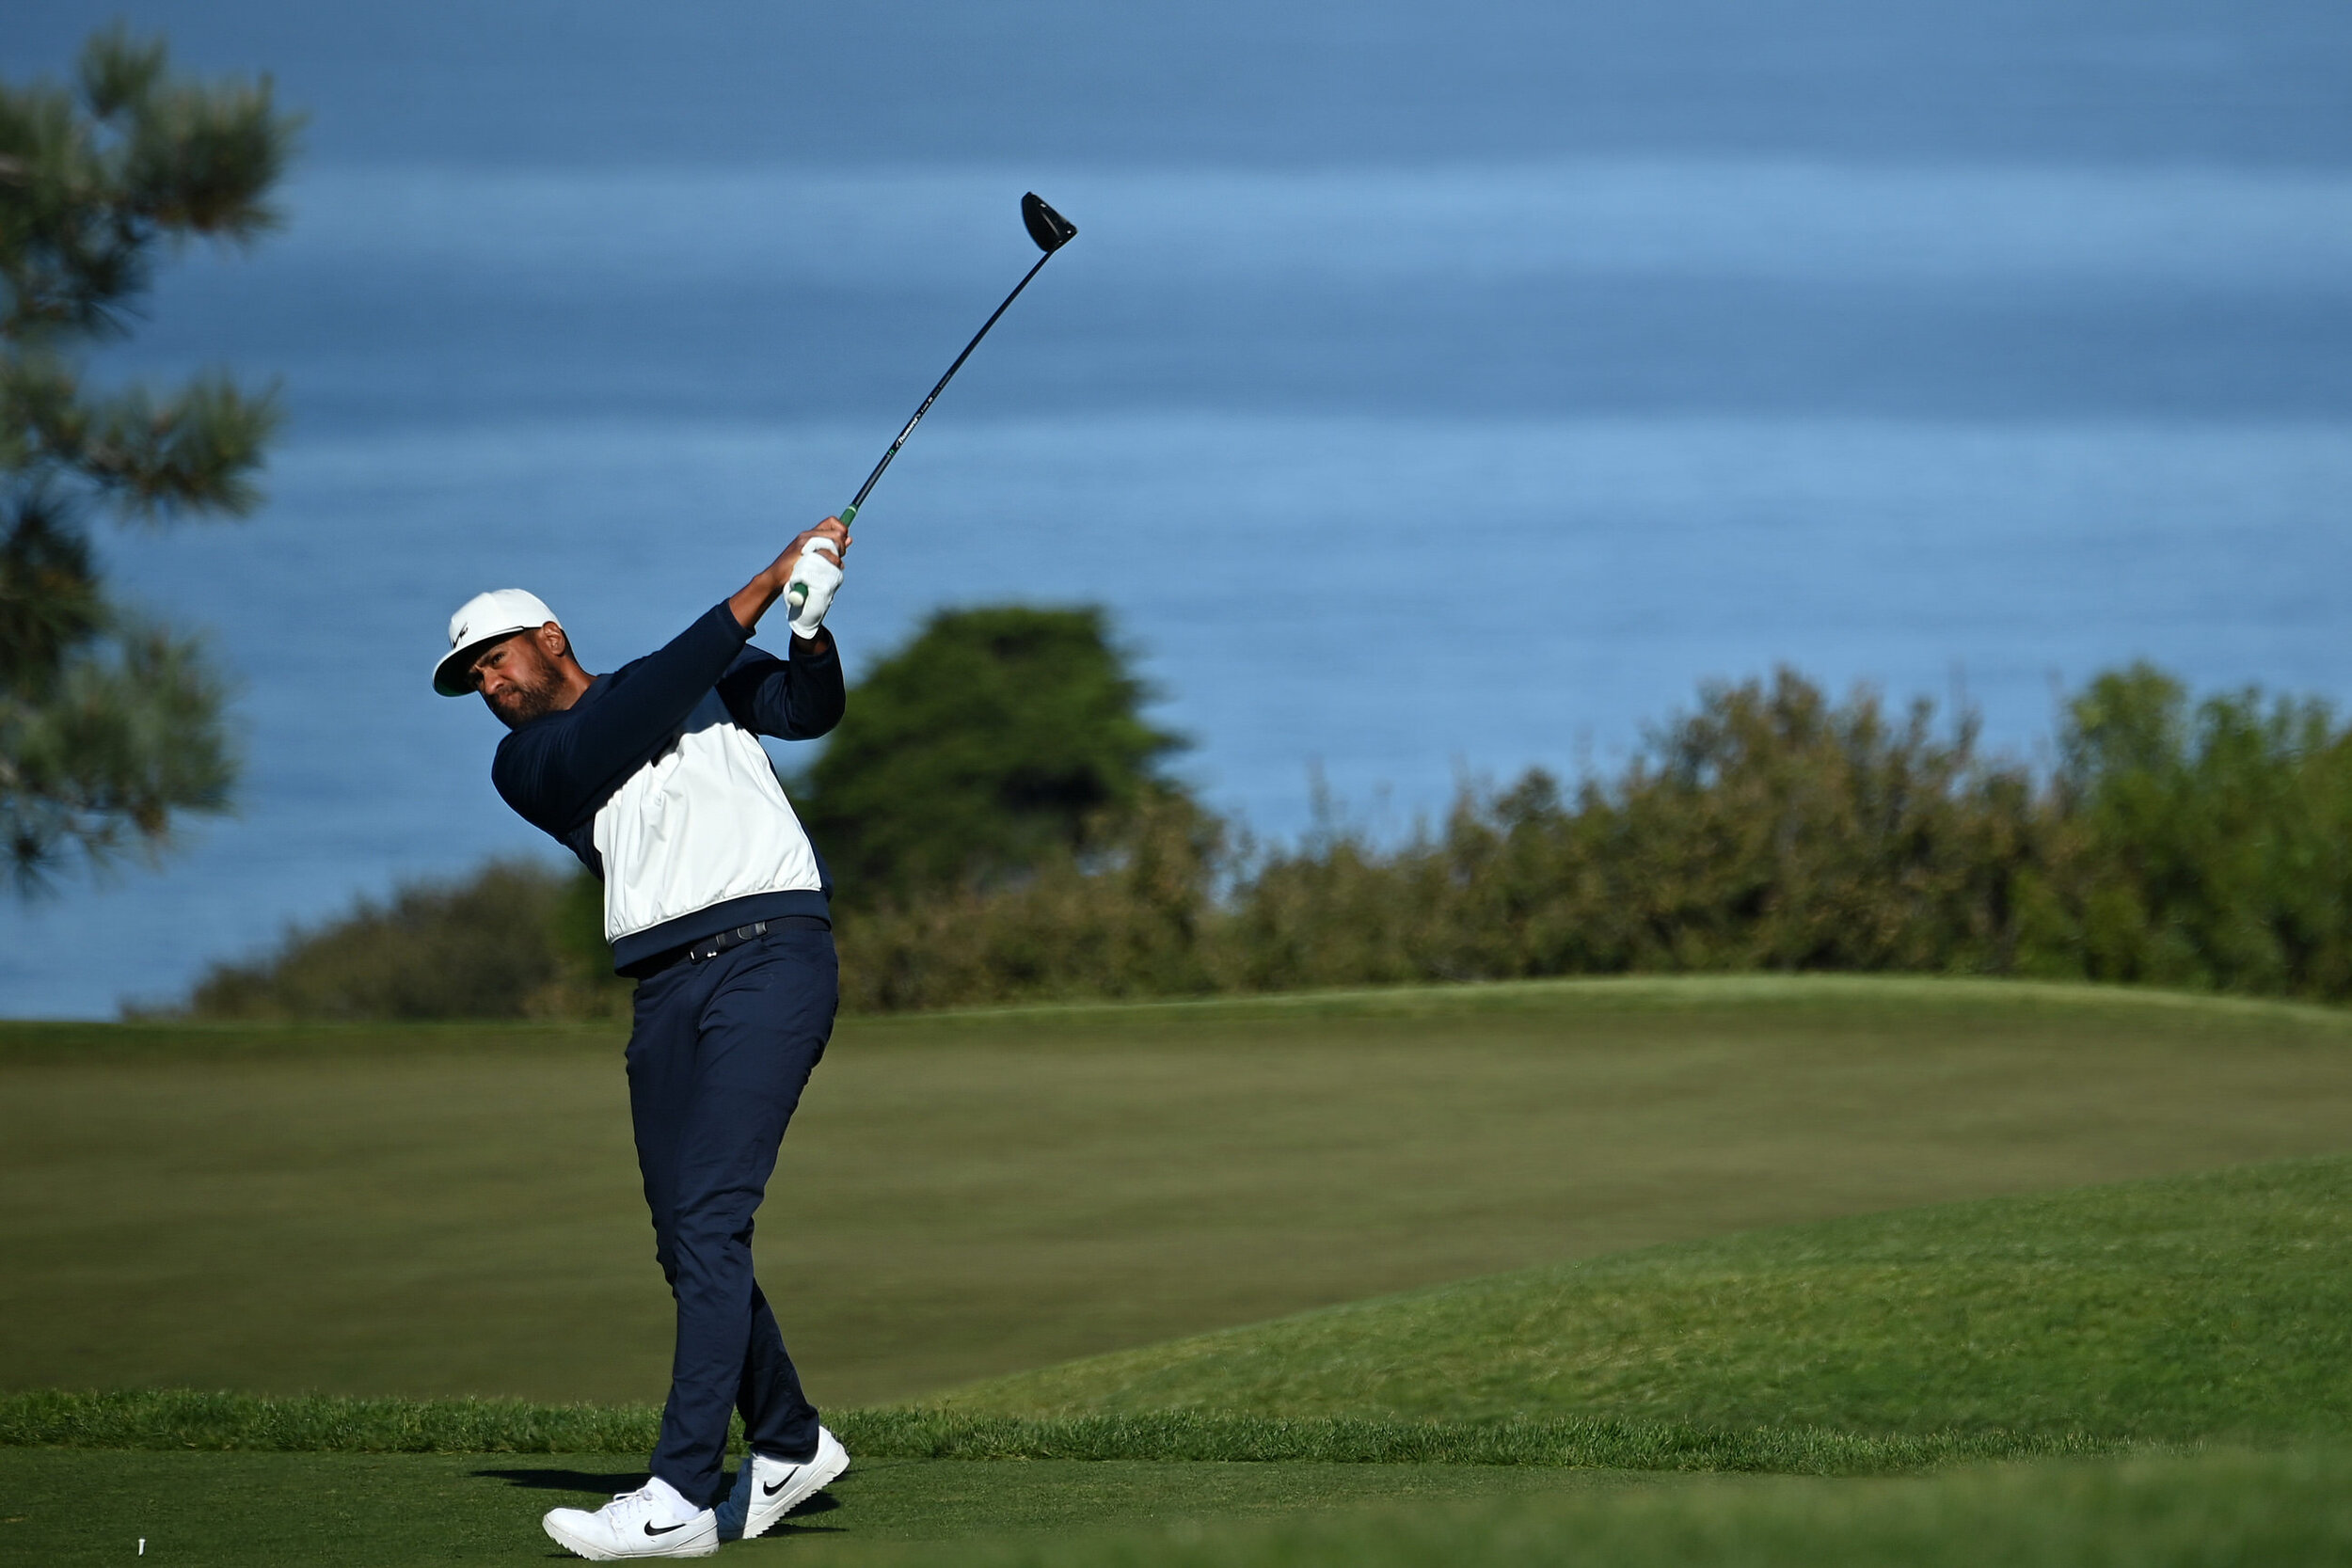  SAN DIEGO, CALIFORNIA - JANUARY 30: Tony Finau hits his tee shot on the 2nd hole during round three of the Farmers Insurance Open at Torrey Pines South on January 30, 2021 in San Diego, California. (Photo by Donald Miralle/Getty Images) 